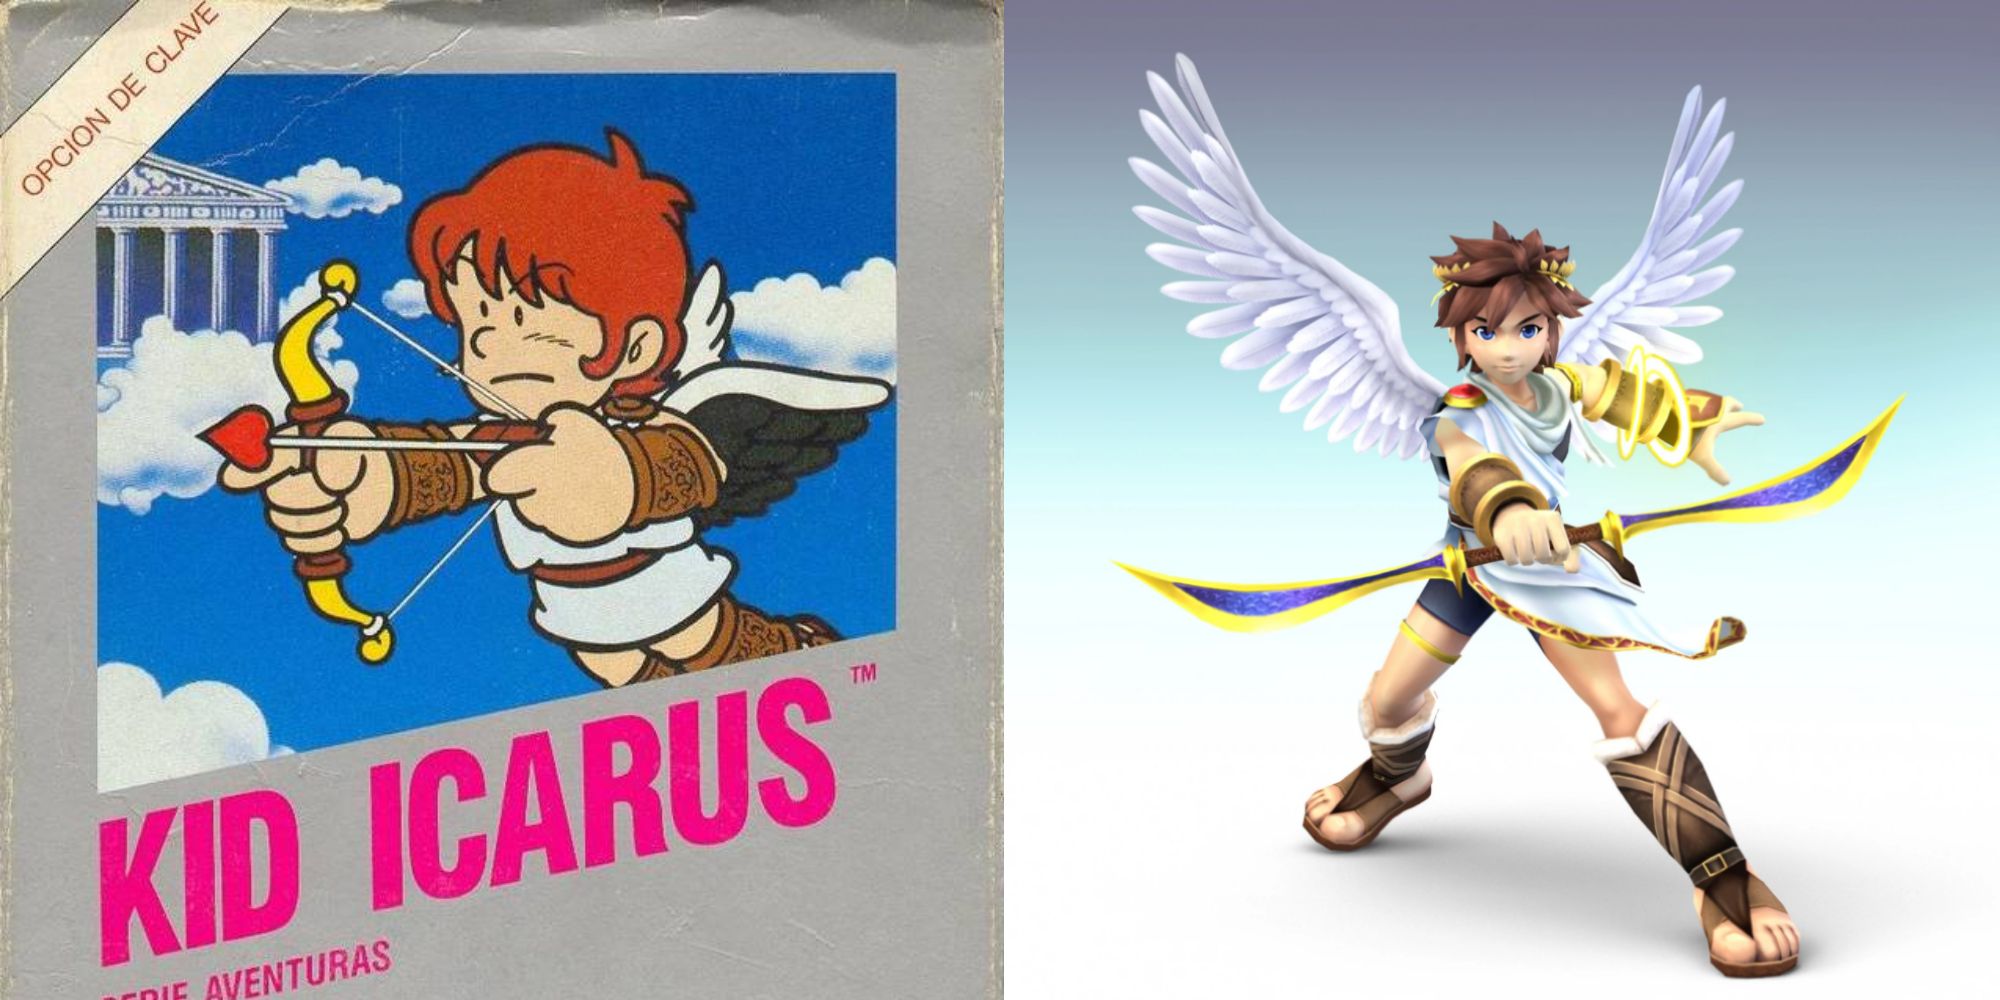 Pit from Kid Icarus compared from the original game to his Smash Bros Brawl design, showing several added elements and generally cooler vibe